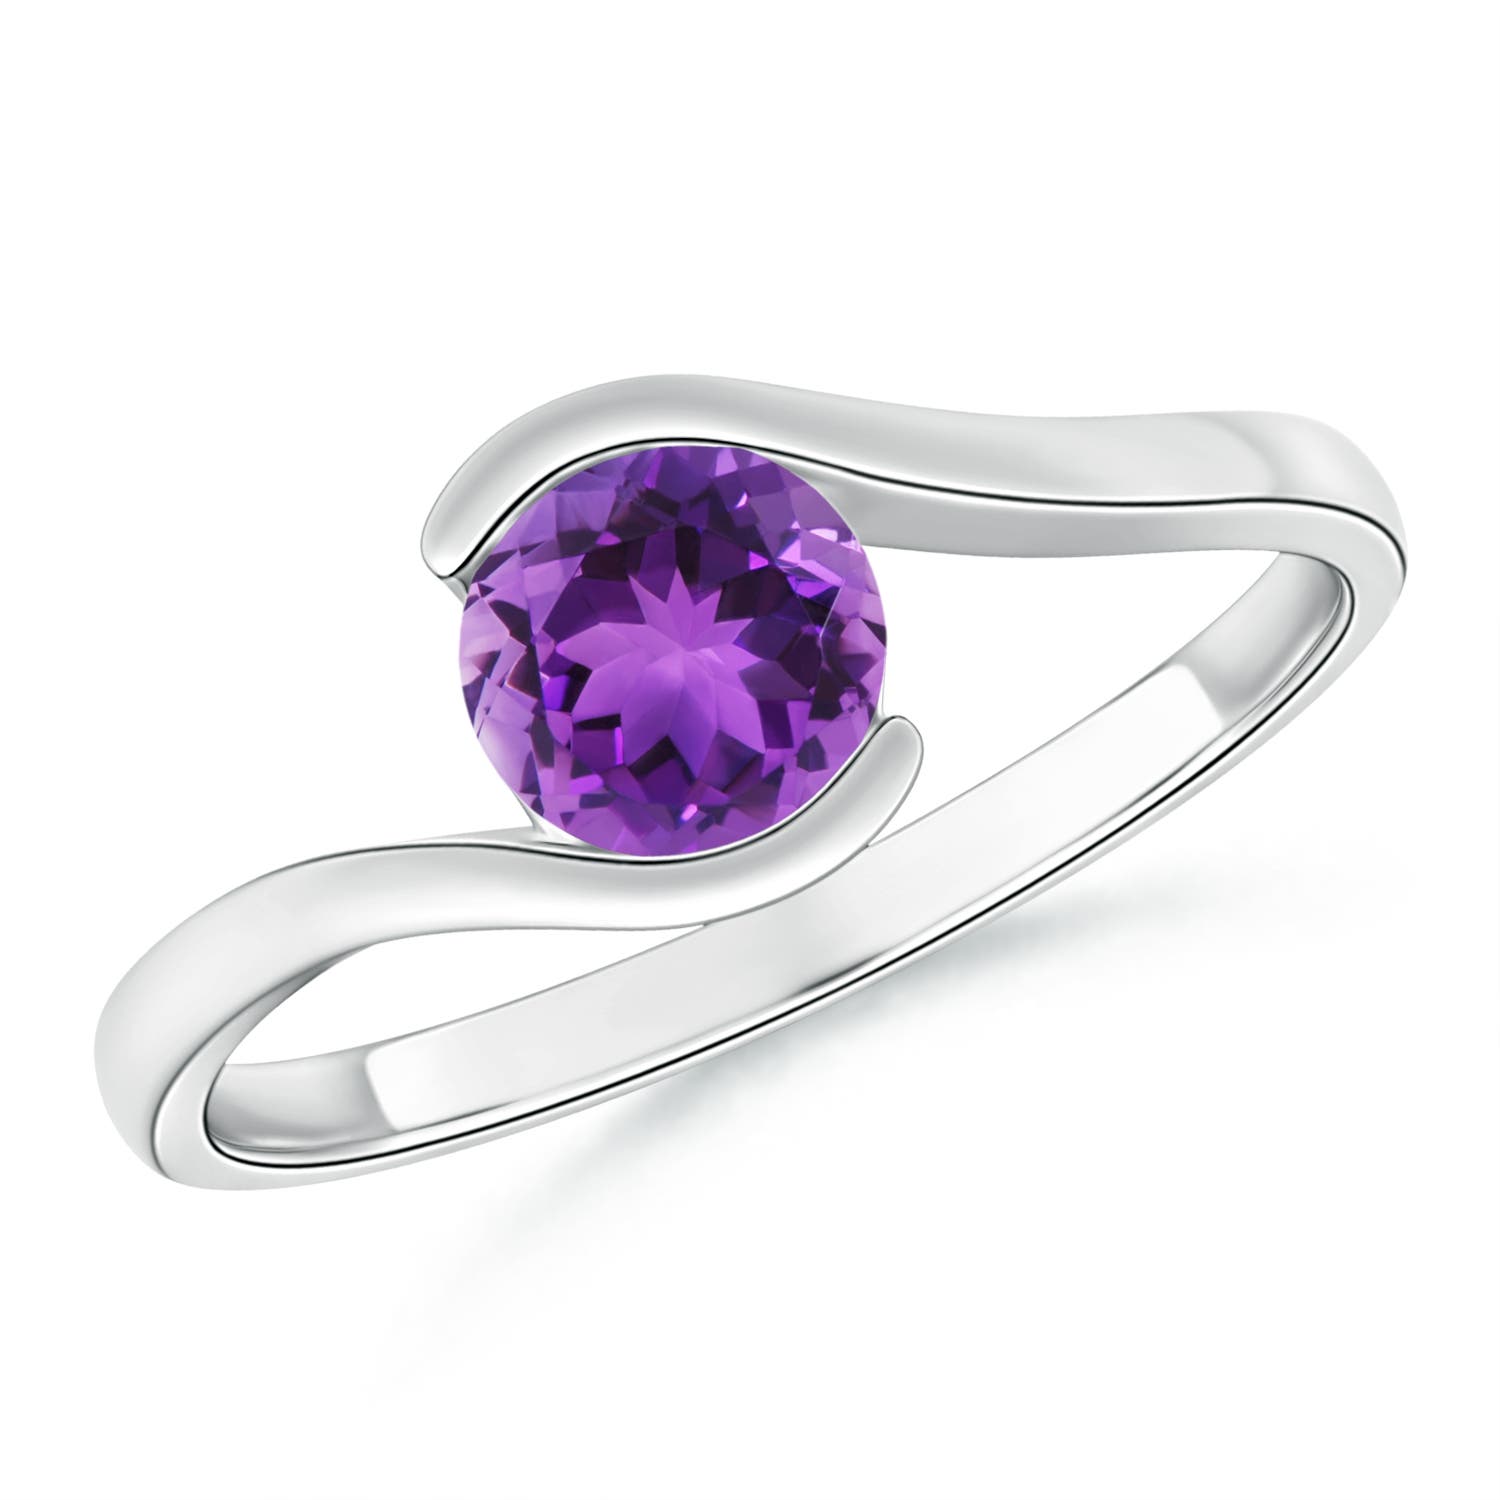 AAA - Amethyst / 0.8 CT / 14 KT White Gold